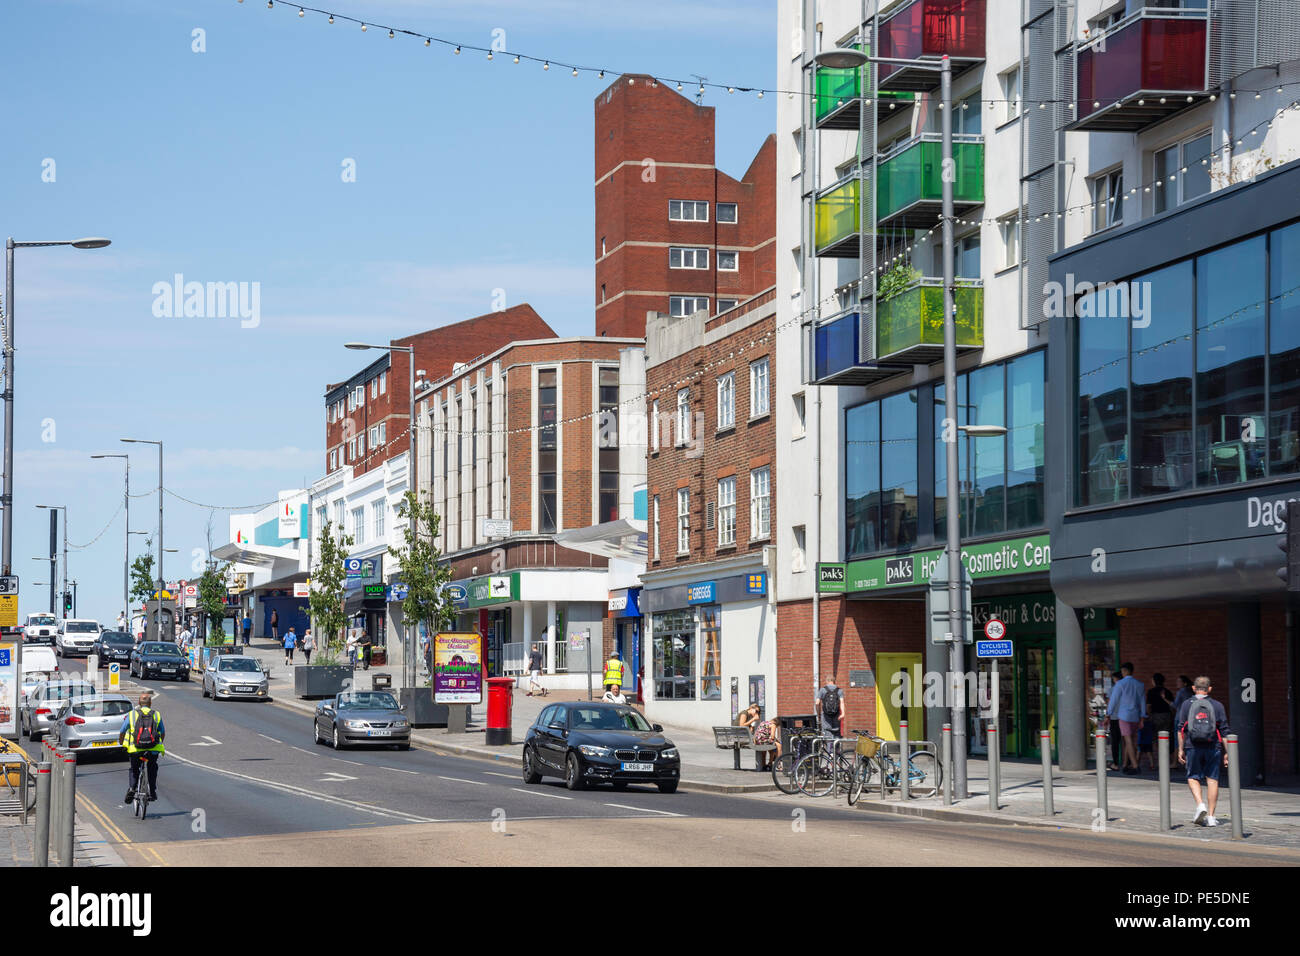 Dagenham High Resolution Stock Photography And Images Alamy